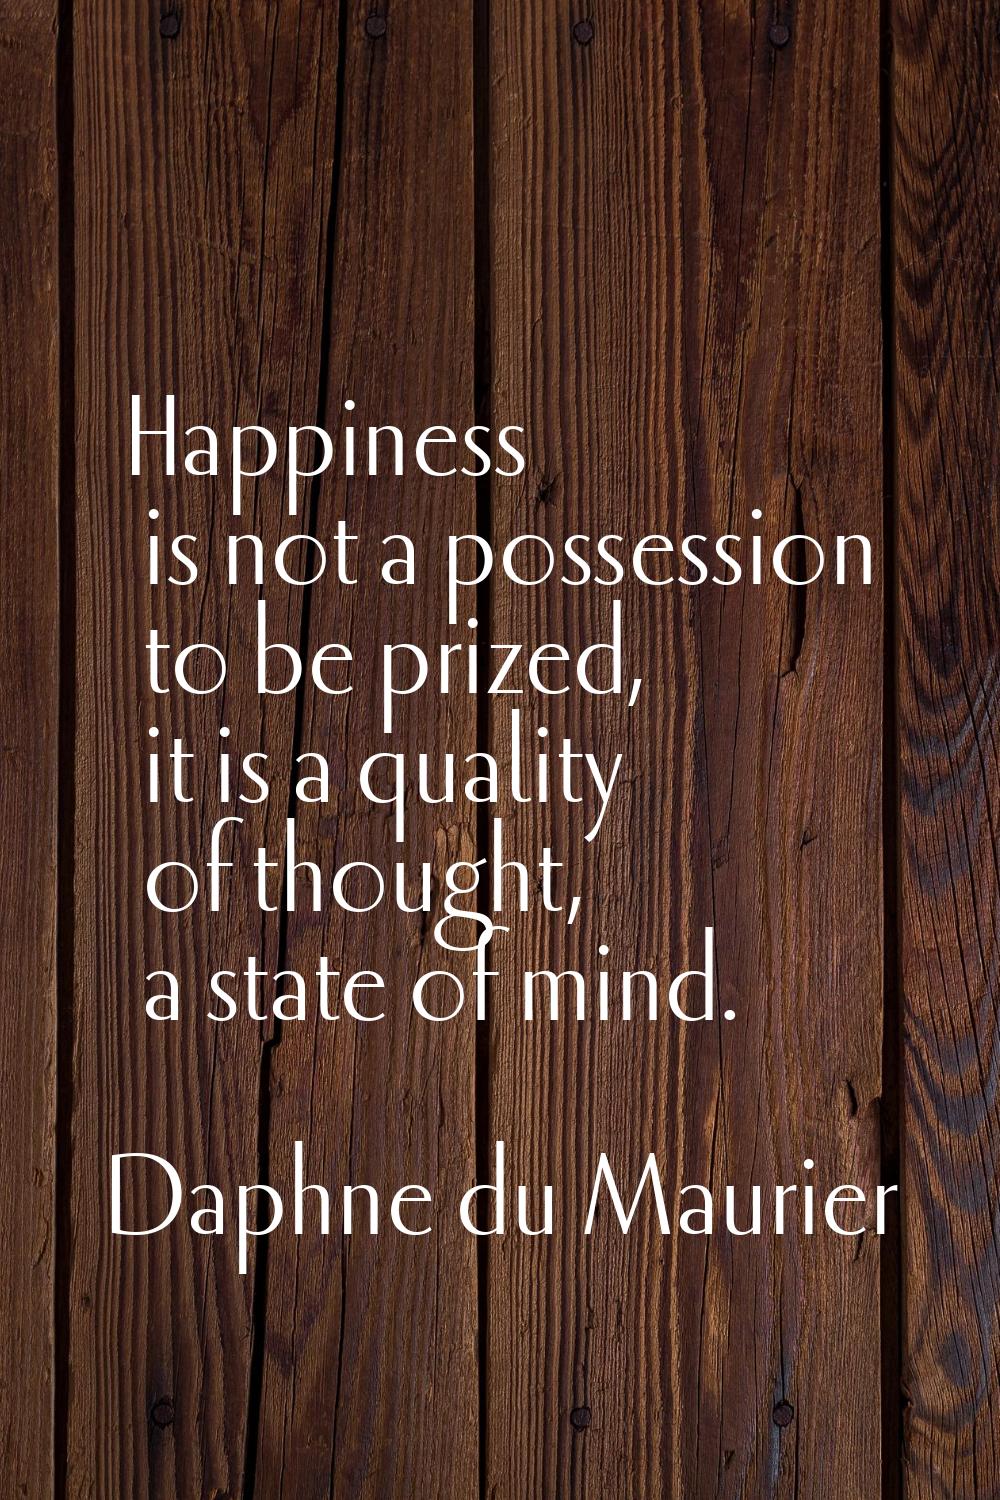 Happiness is not a possession to be prized, it is a quality of thought, a state of mind.